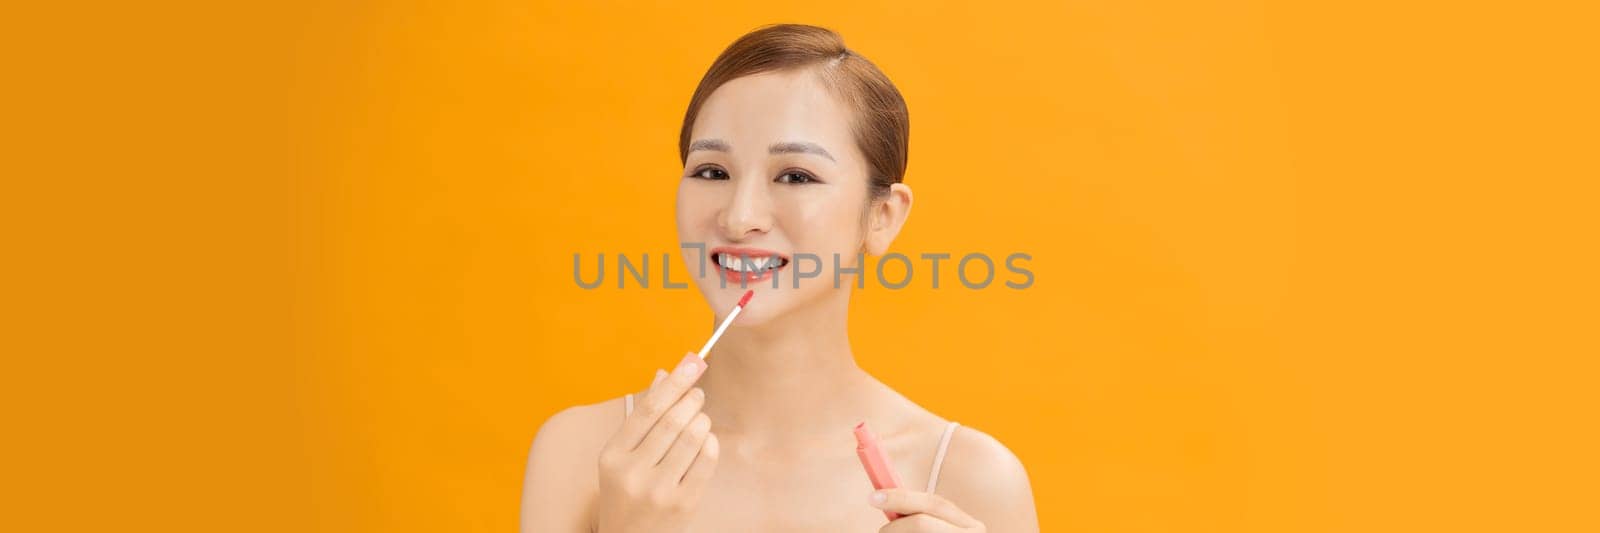 Web banner of young woman applies lipstick on lips.  by makidotvn